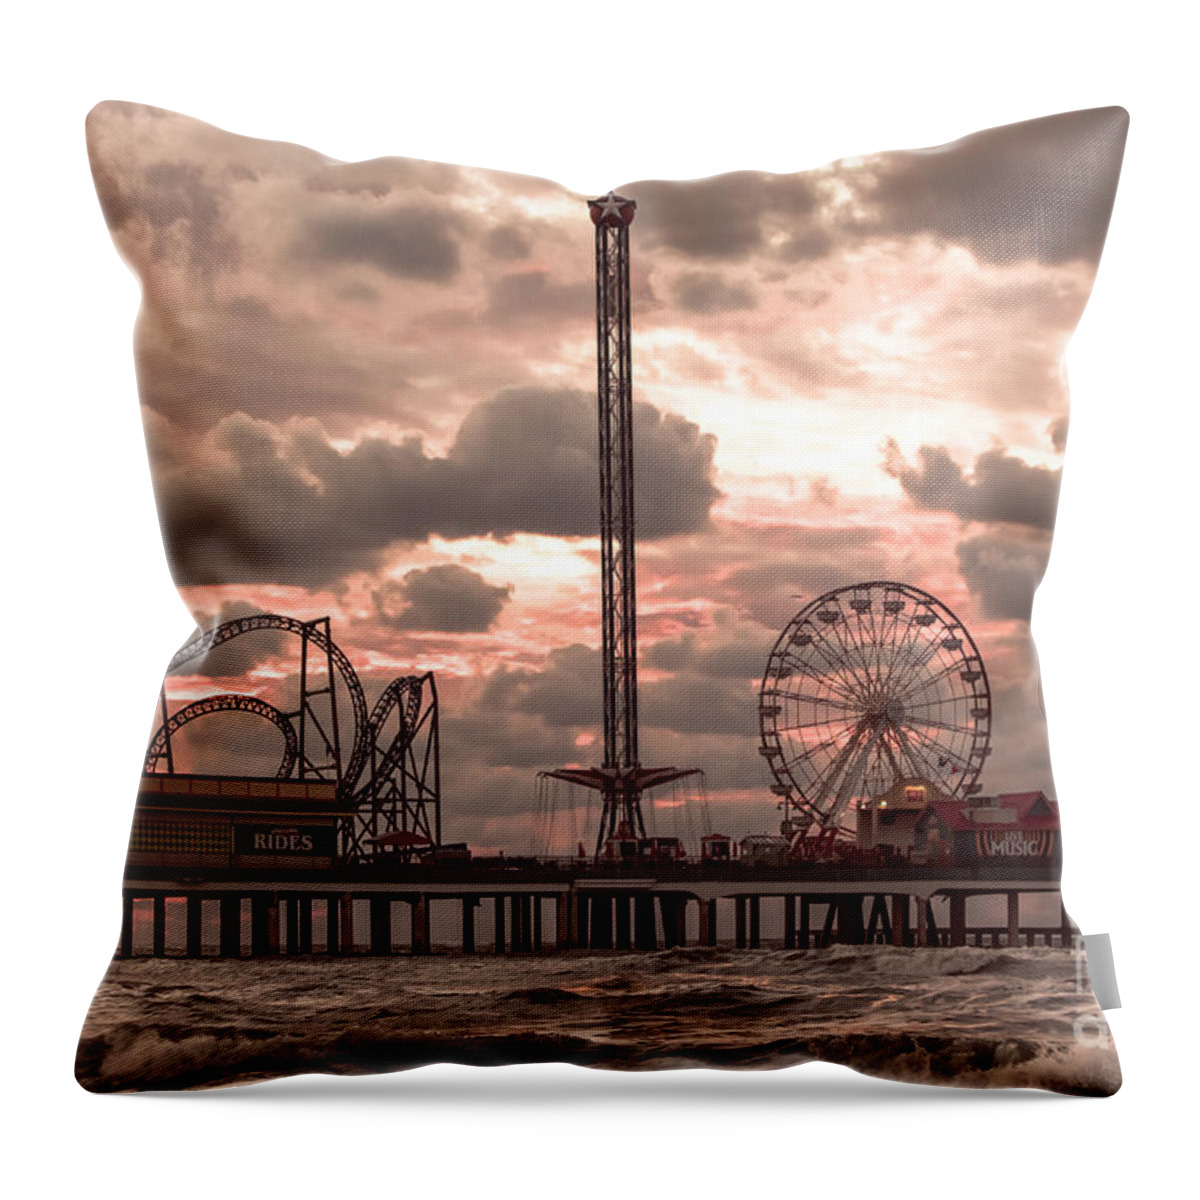 Landscape Throw Pillow featuring the photograph Galveston Island Morning by Robert Frederick